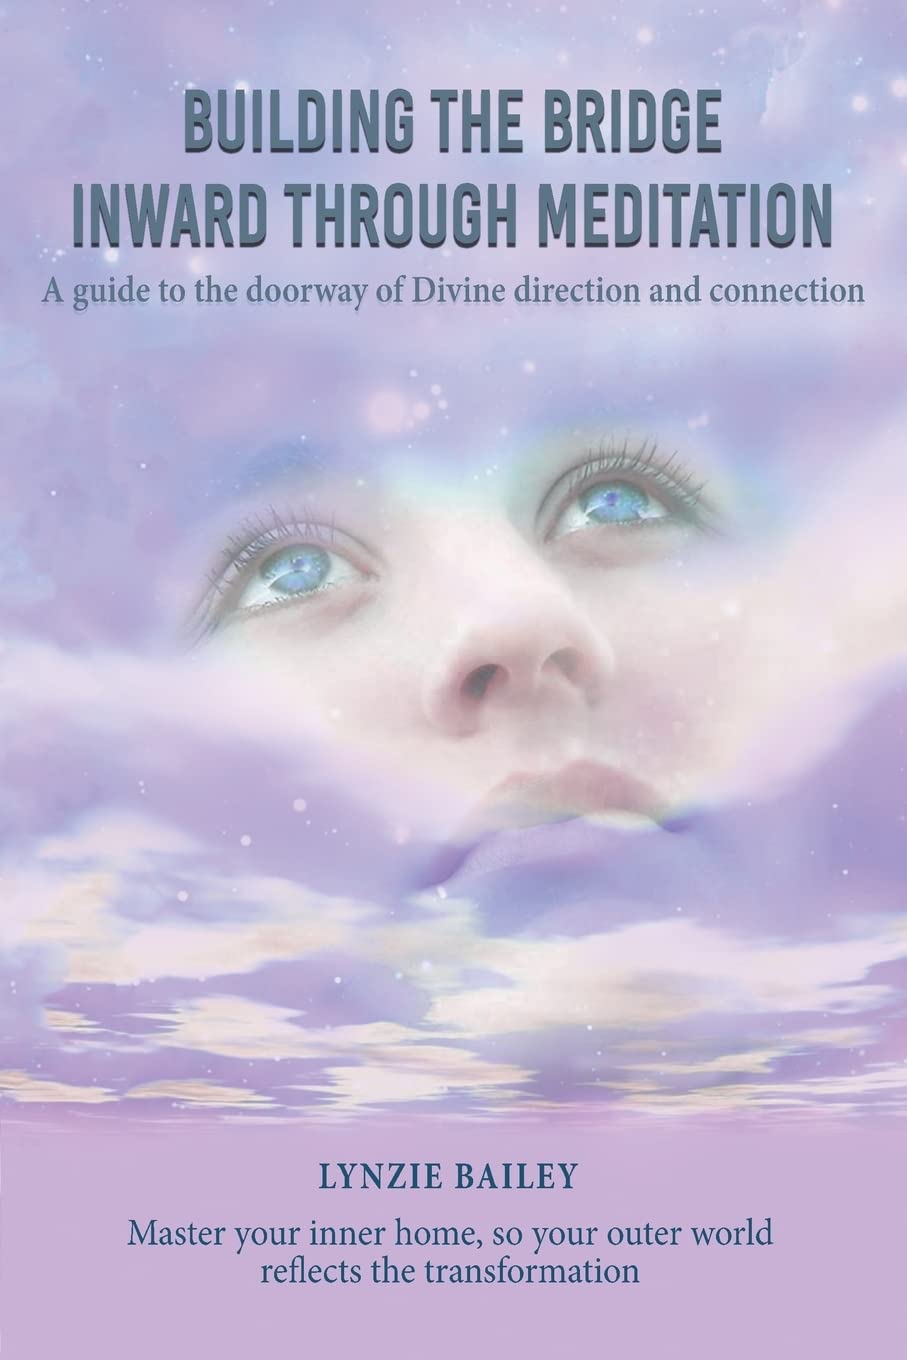 Author's Tranquility Press Publishes Lynzie Bailey’s "Building the Bridge Inward through Meditation"